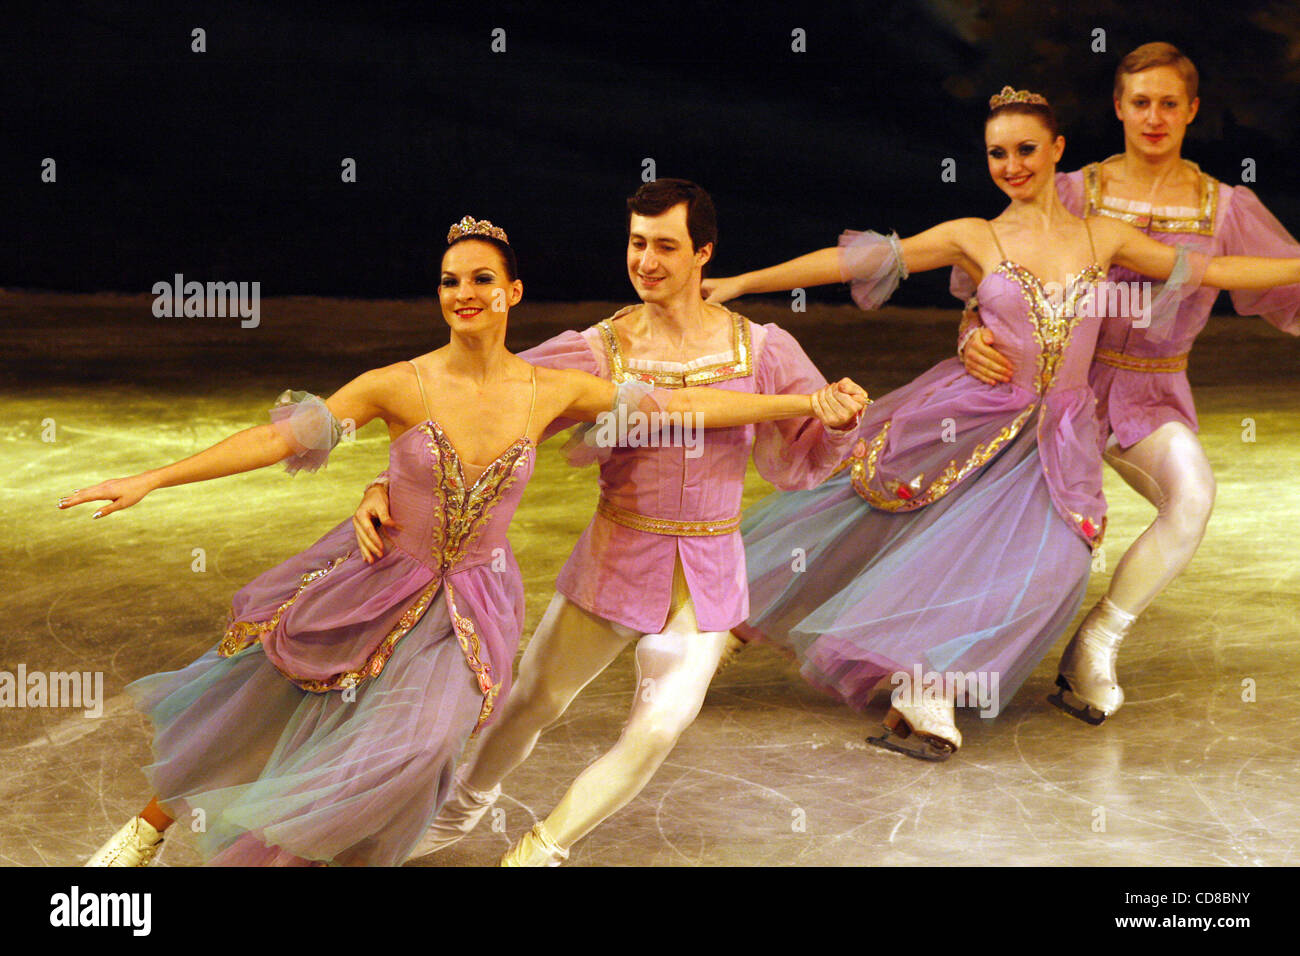 Oct 16, 2008 - Nanjing, China - St. Petersburg State Ice Ballet opened the 31st 'Theatre of Nations' festival in Nanjing, China with a performance of 'Swan Lake' on Oct. 16, 2008. The 10-day festival will feature 37 performing groups from five continents and continue until Oct. 26. The Theatre of Na Stock Photo